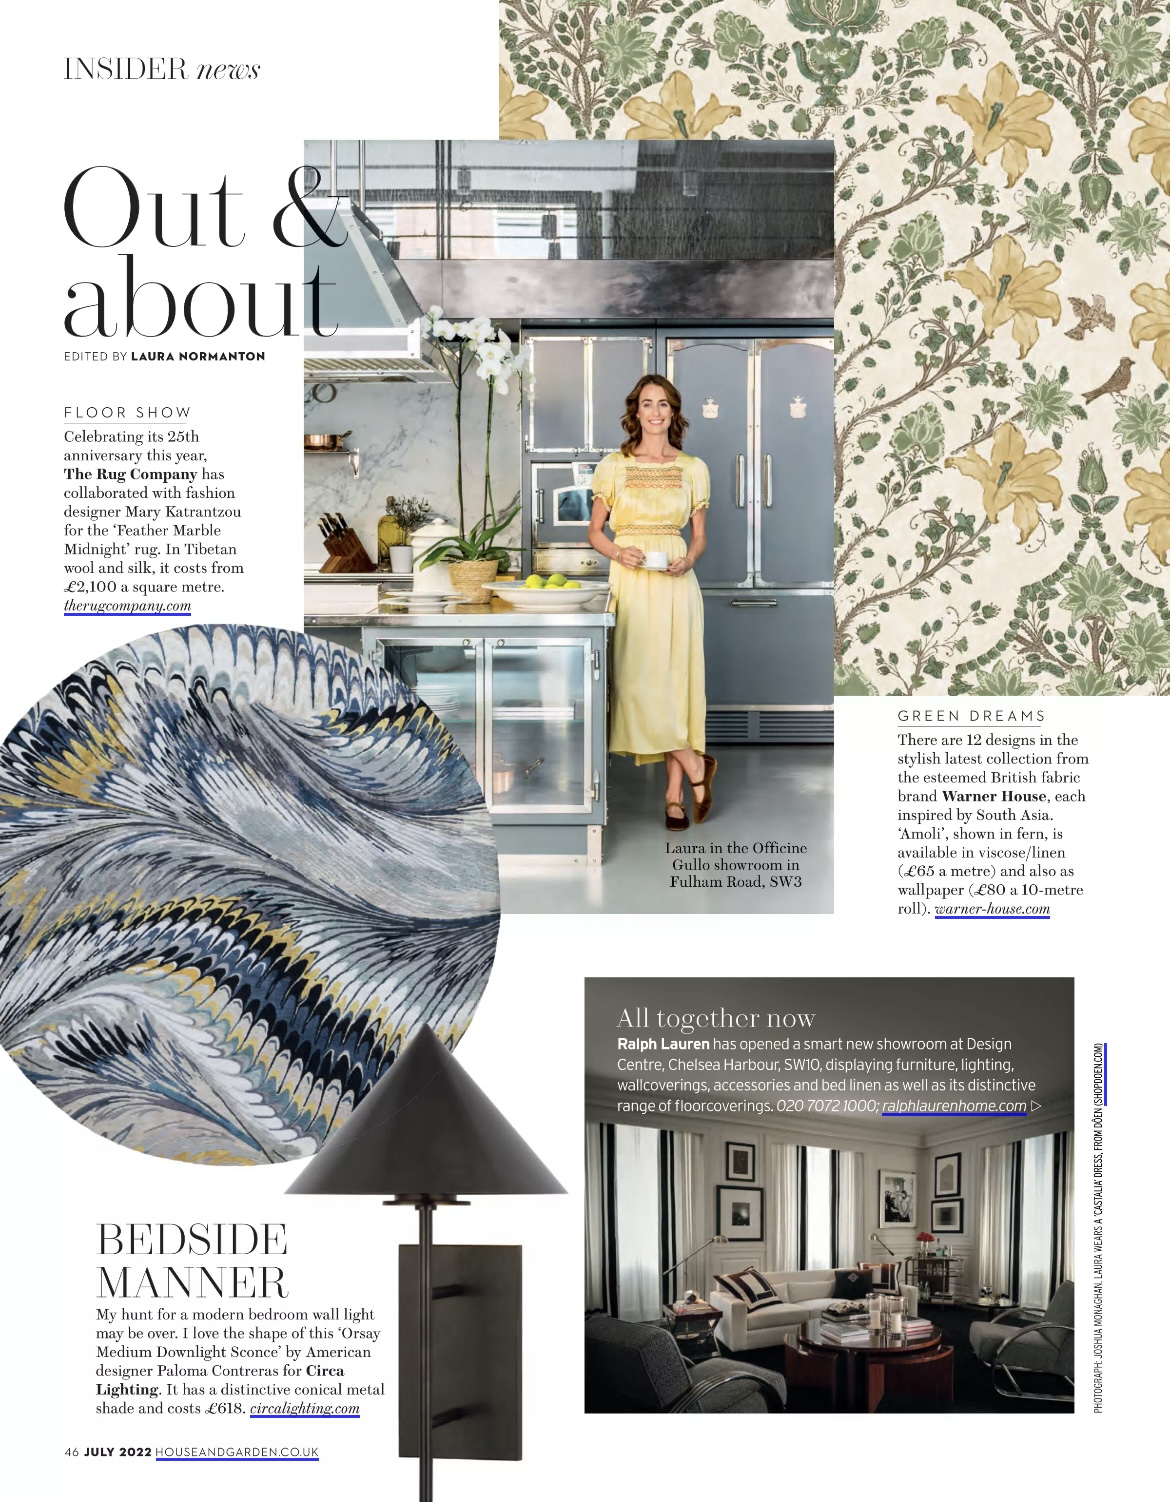 Feather Marble Midnight presented in the House & Garden Magazine July 2022